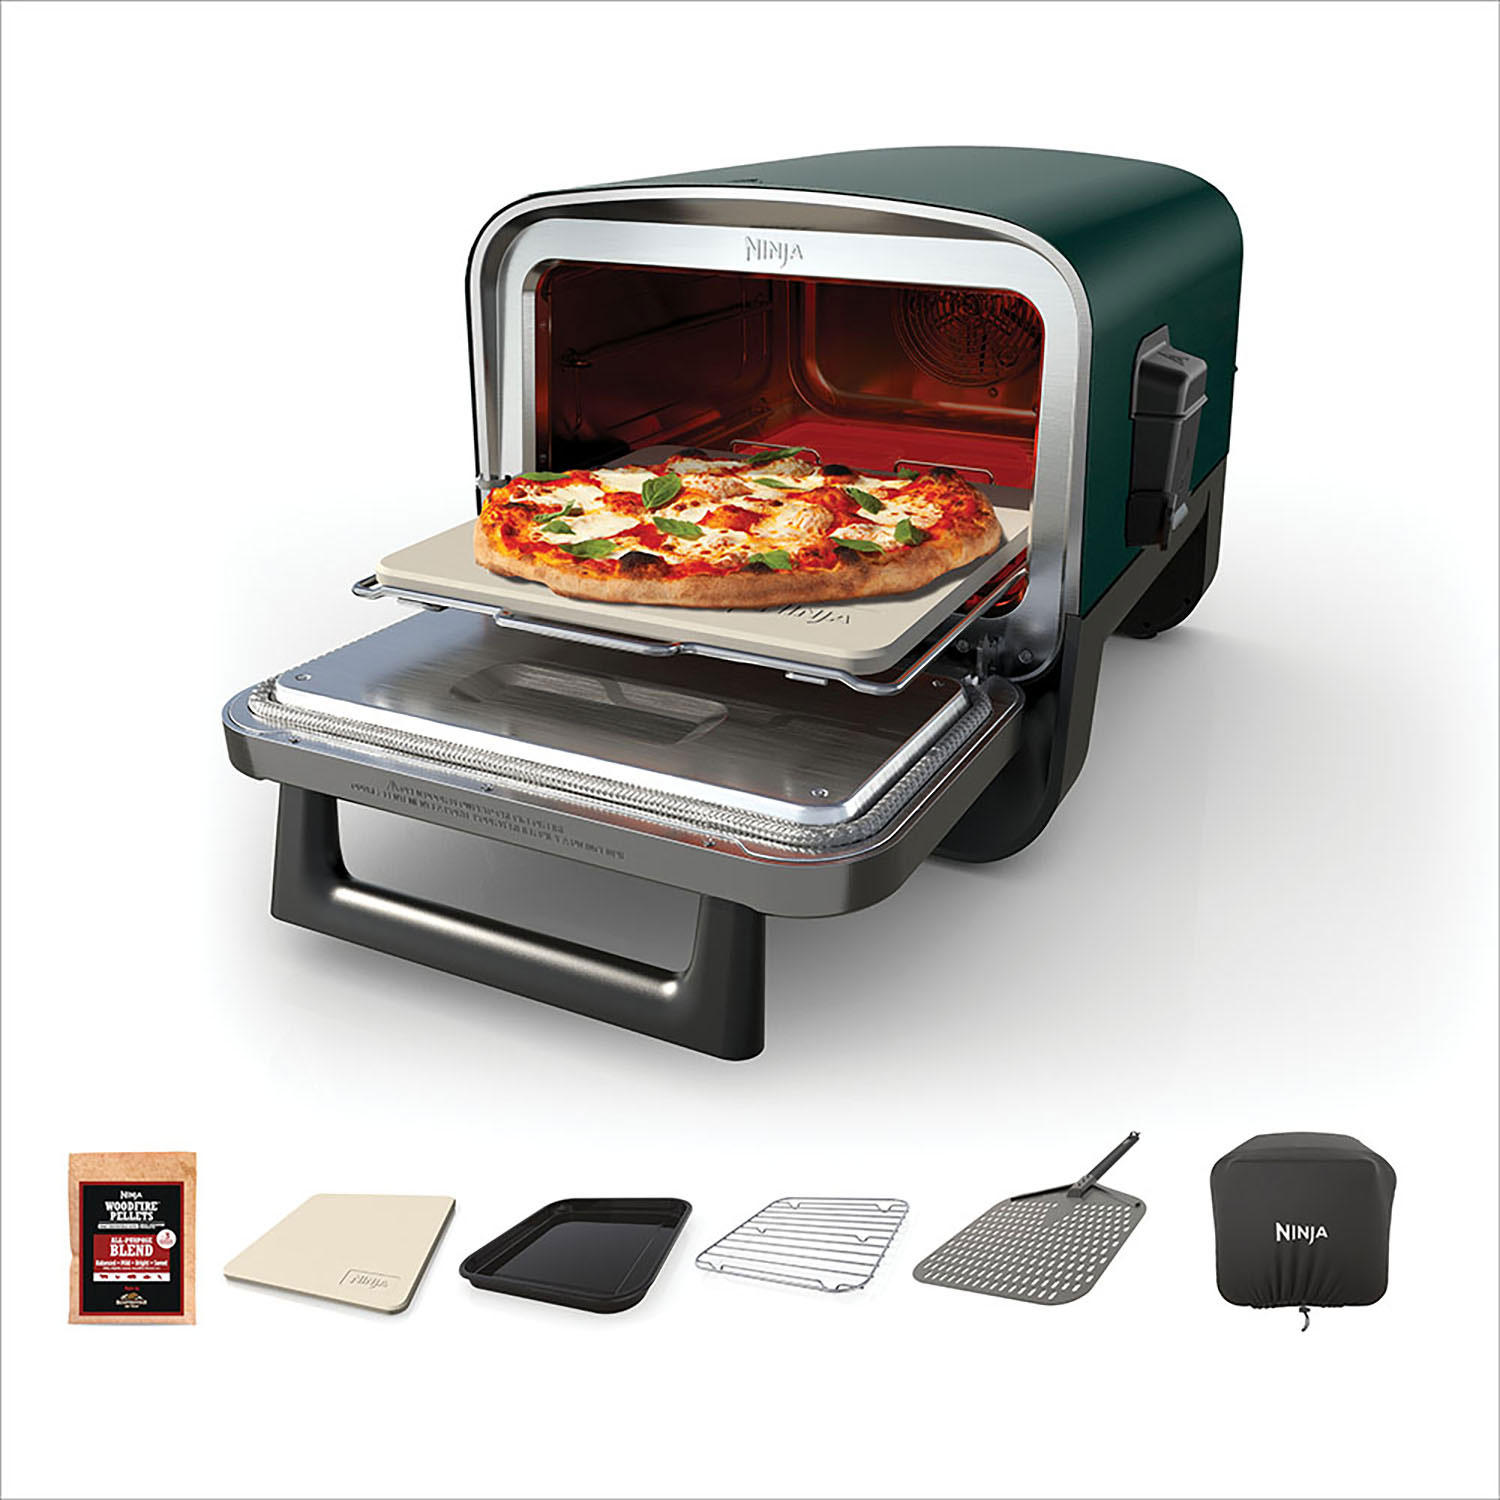 Ninja Woodfire™ 8-in-1 Outdoor Oven, 700°F High-Heat Roaster, Artisan Pizza Oven, Foolproof BBQ Smoker with Woodfire